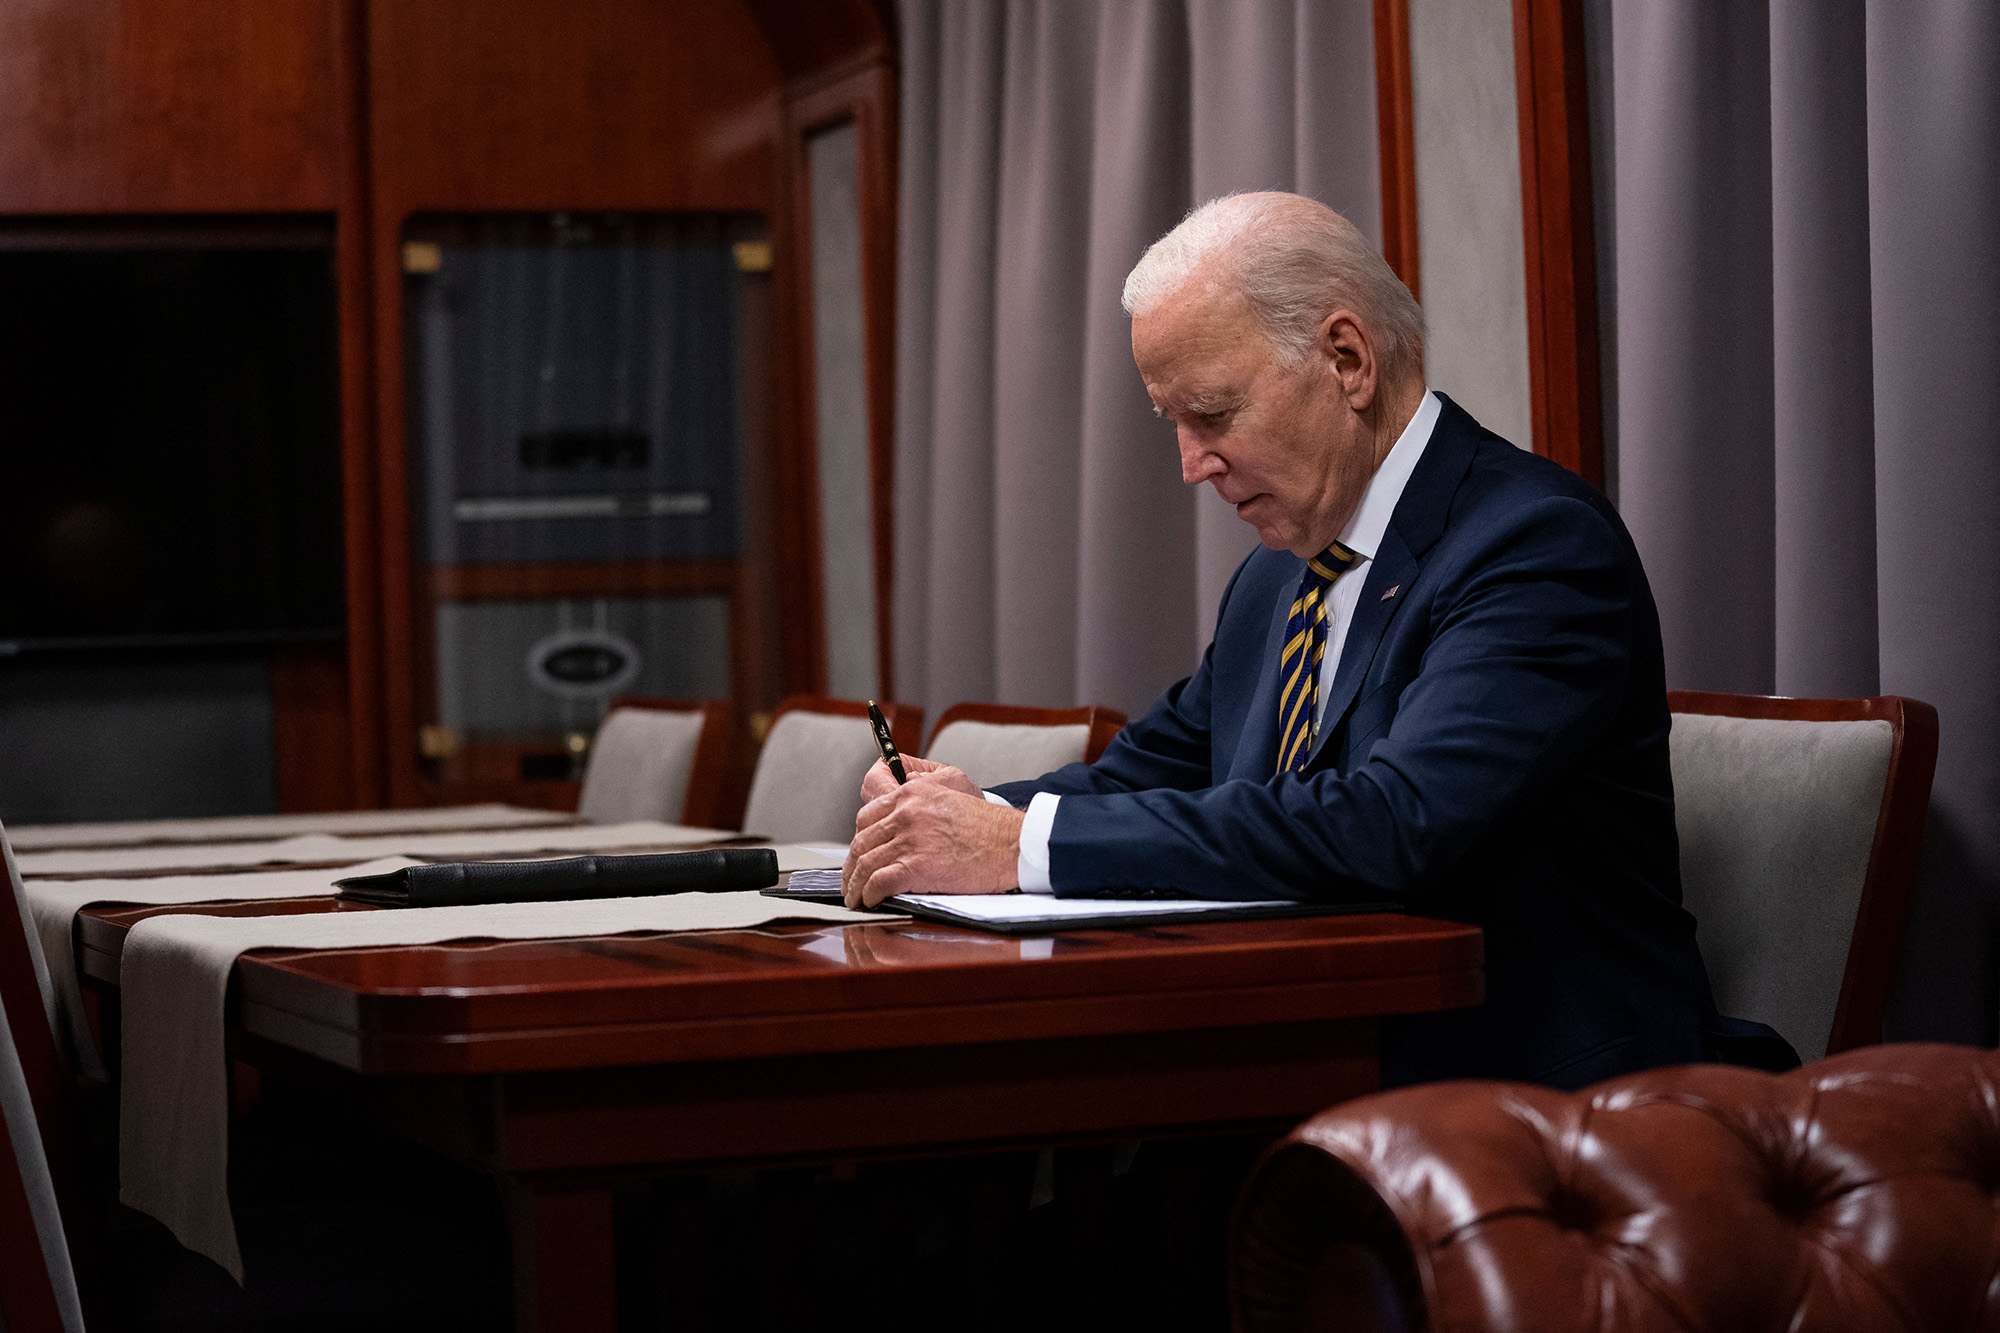 US President Joe Biden sits on a train as he goes over his speech after a surprise visit to meet with Ukrainian President Volodymyr Zelensky, in Kyiv, Ukraine, on February 20.